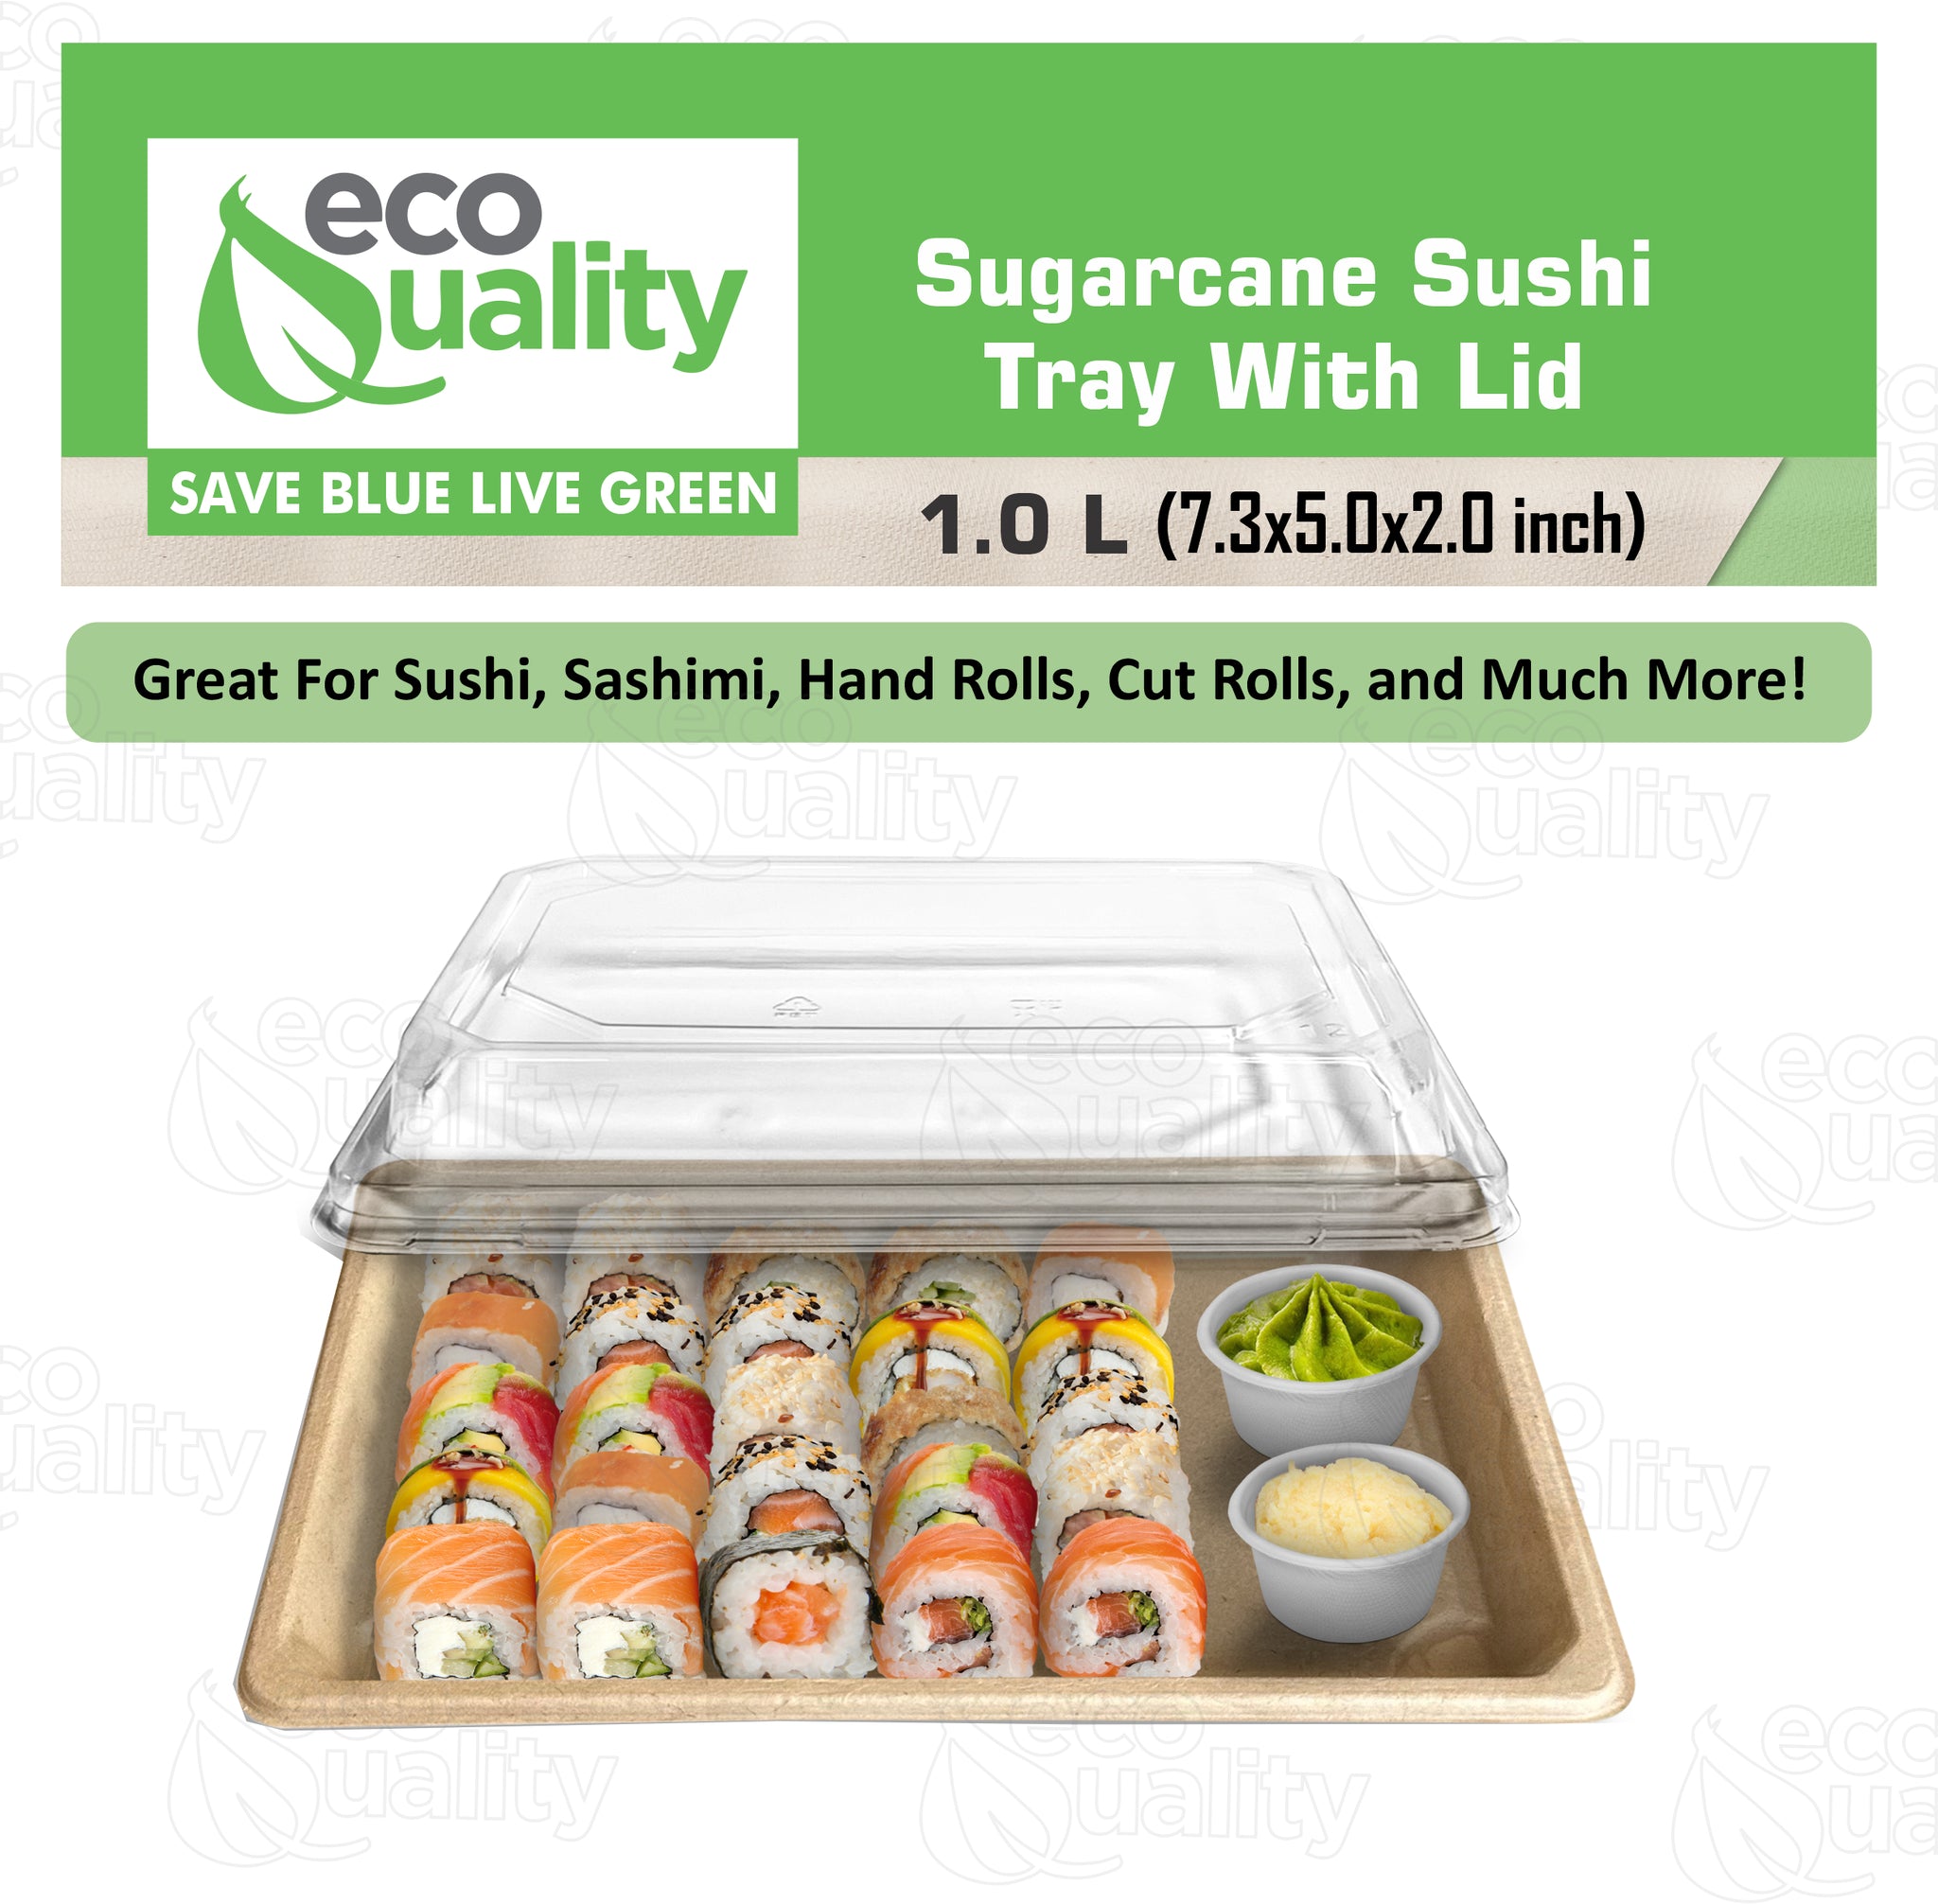 Compostable Packaging, Sustainable Sushi Tray, Eco-Friendly Food Packaging, Biodegradable Sushi Platter, Green Packaging Solution, Environmentally Friendly Tray, Zero-Waste Sushi Packaging, Bioplastics Sushi Tray, Earth-Friendly Sushi Container, Organic Waste Composting, Biodegradable Food Service, Natural Fiber Sushi Platter, Eco-conscious Sushi Packaging, Compostable Takeout Container